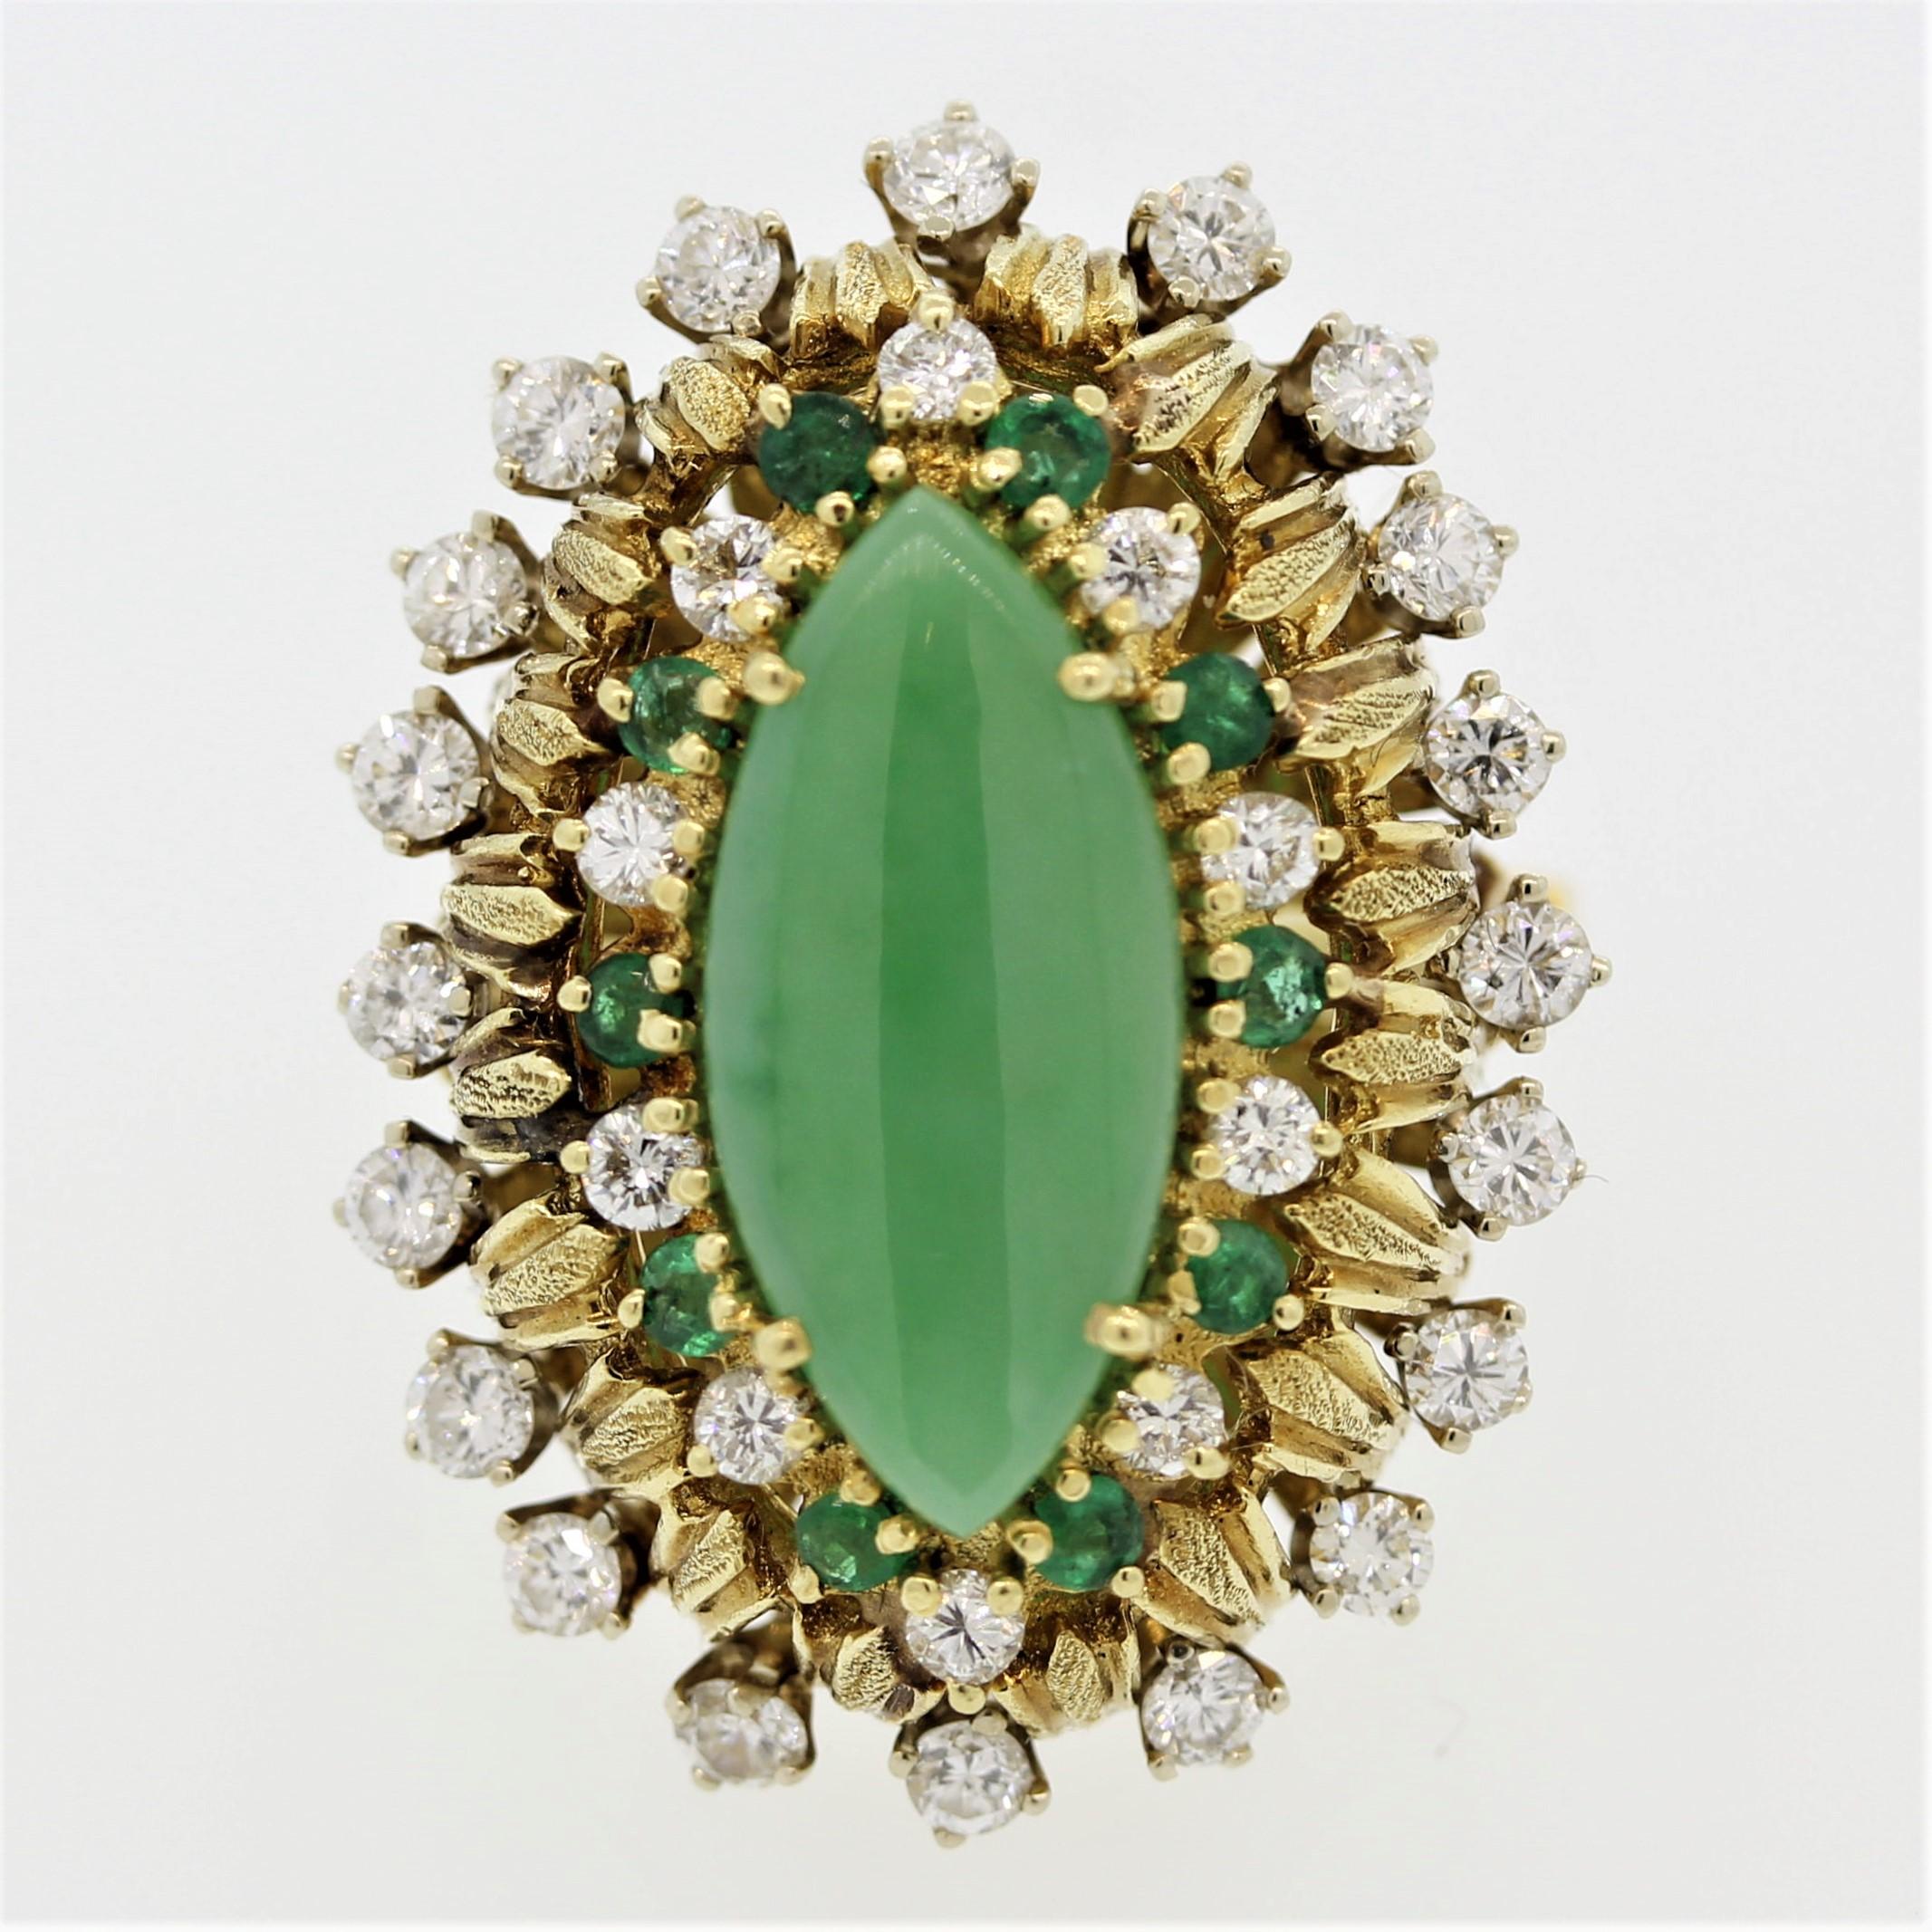 A wonderfully unique ring featuring an approximately 4 carat piece of green jade in a navette shape. It is accented by 1.50 carats of round brilliant cut diamonds along with 0.30 carats of round cut emeralds. Made in 18k yellow gold, this navette